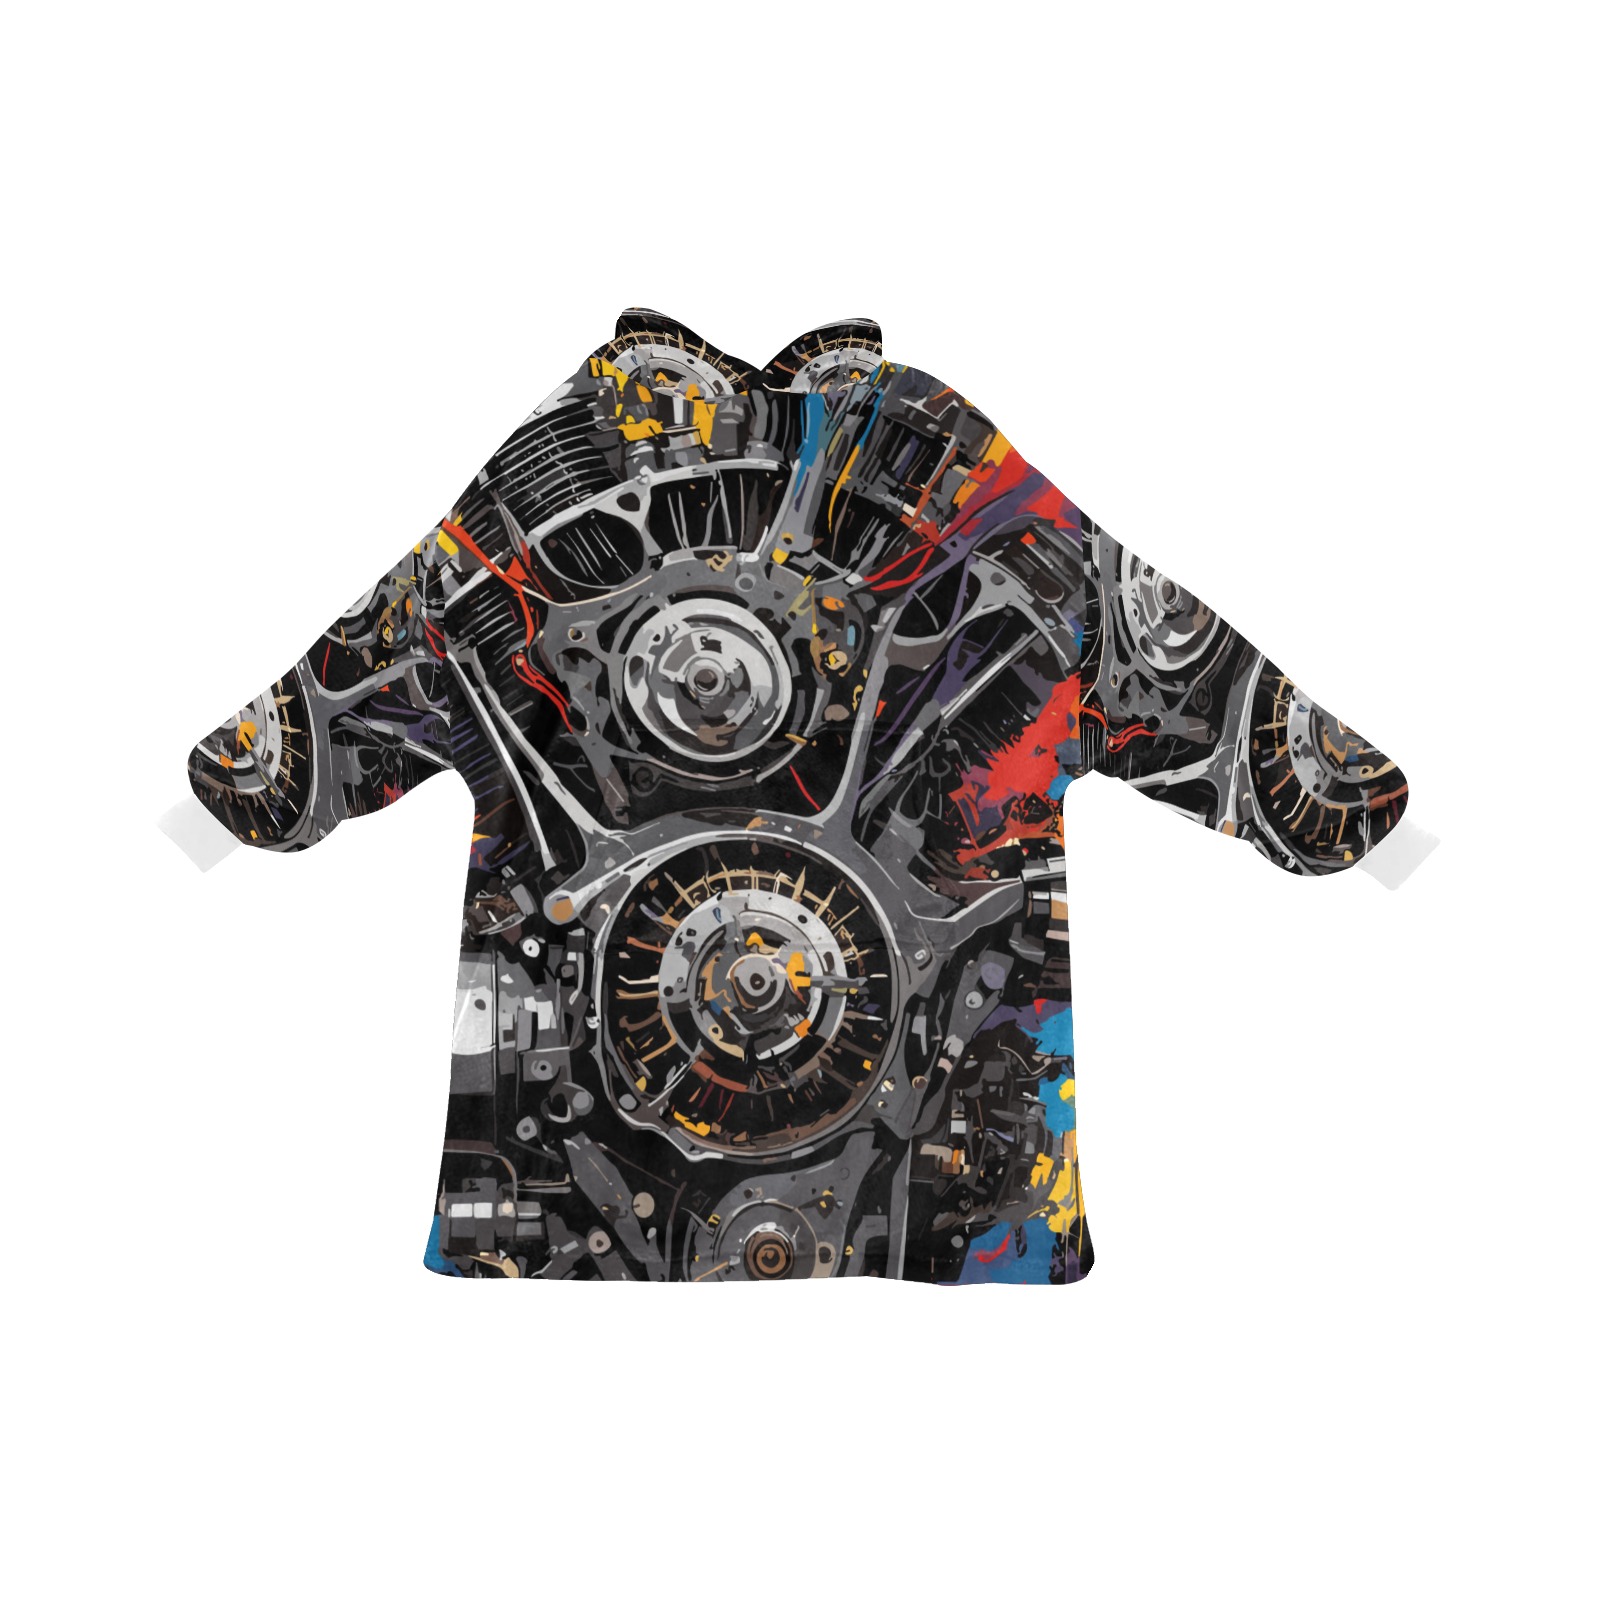 Fantasy Mechanical Engine Colorful Abstract Art Blanket Hoodie for Men